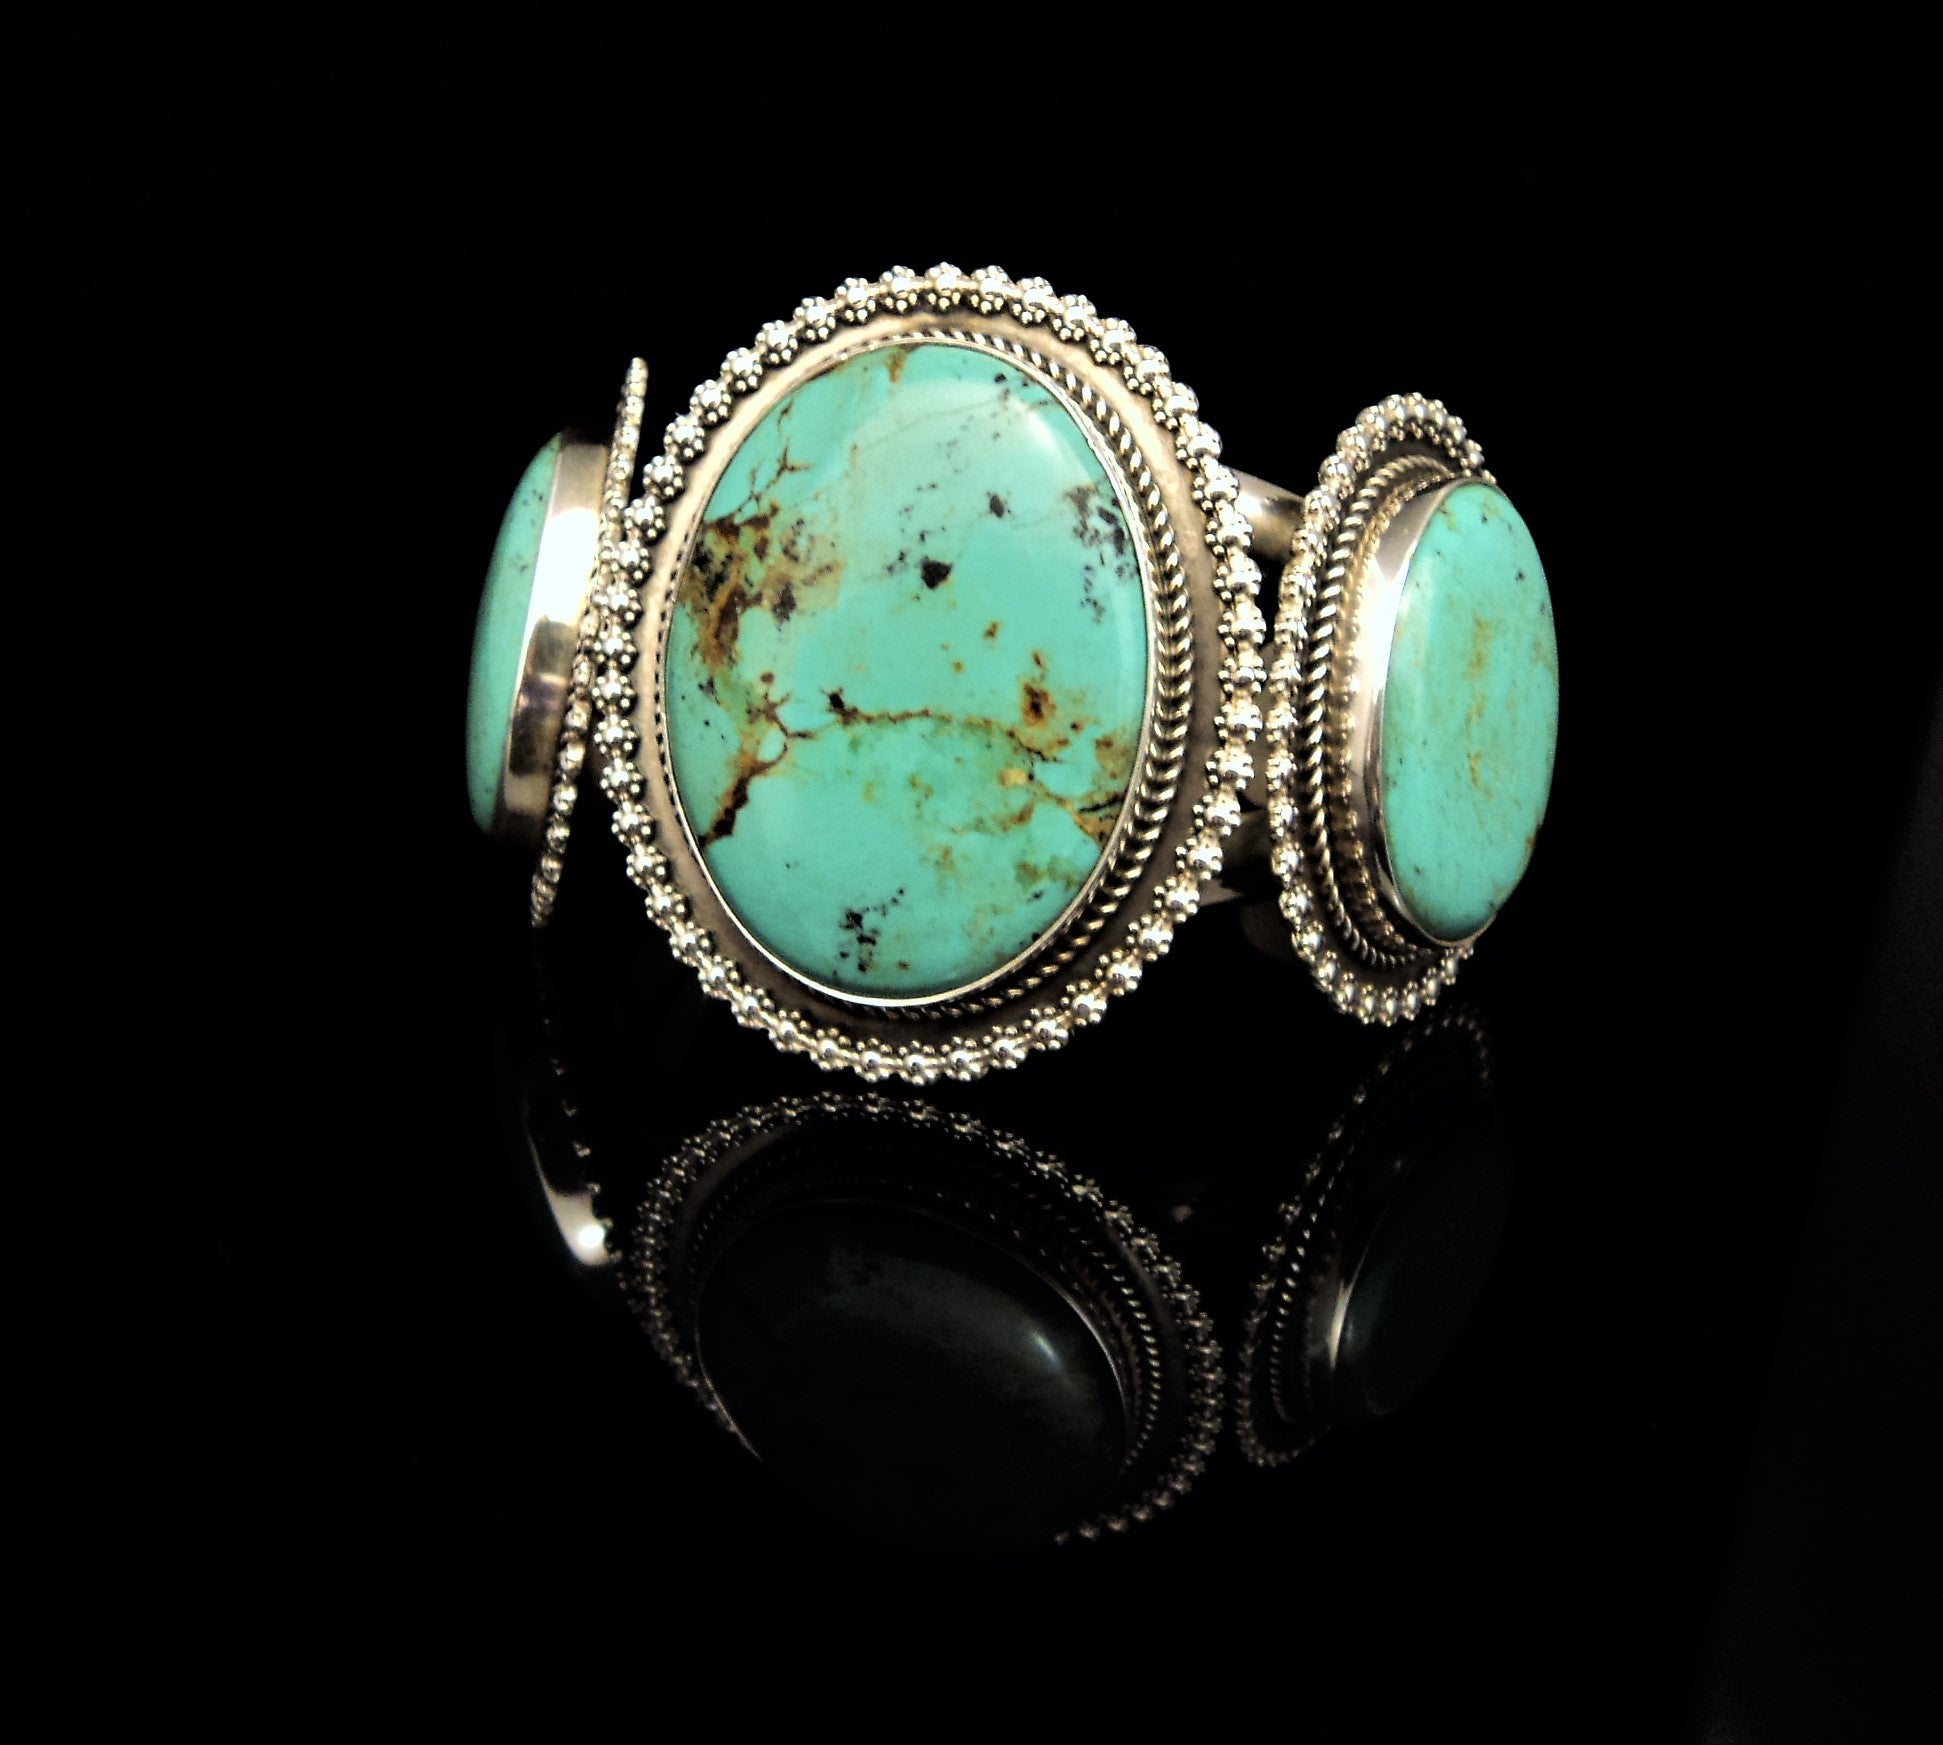 Native American Sterling Silver and Turquoise Cuff Bracelet